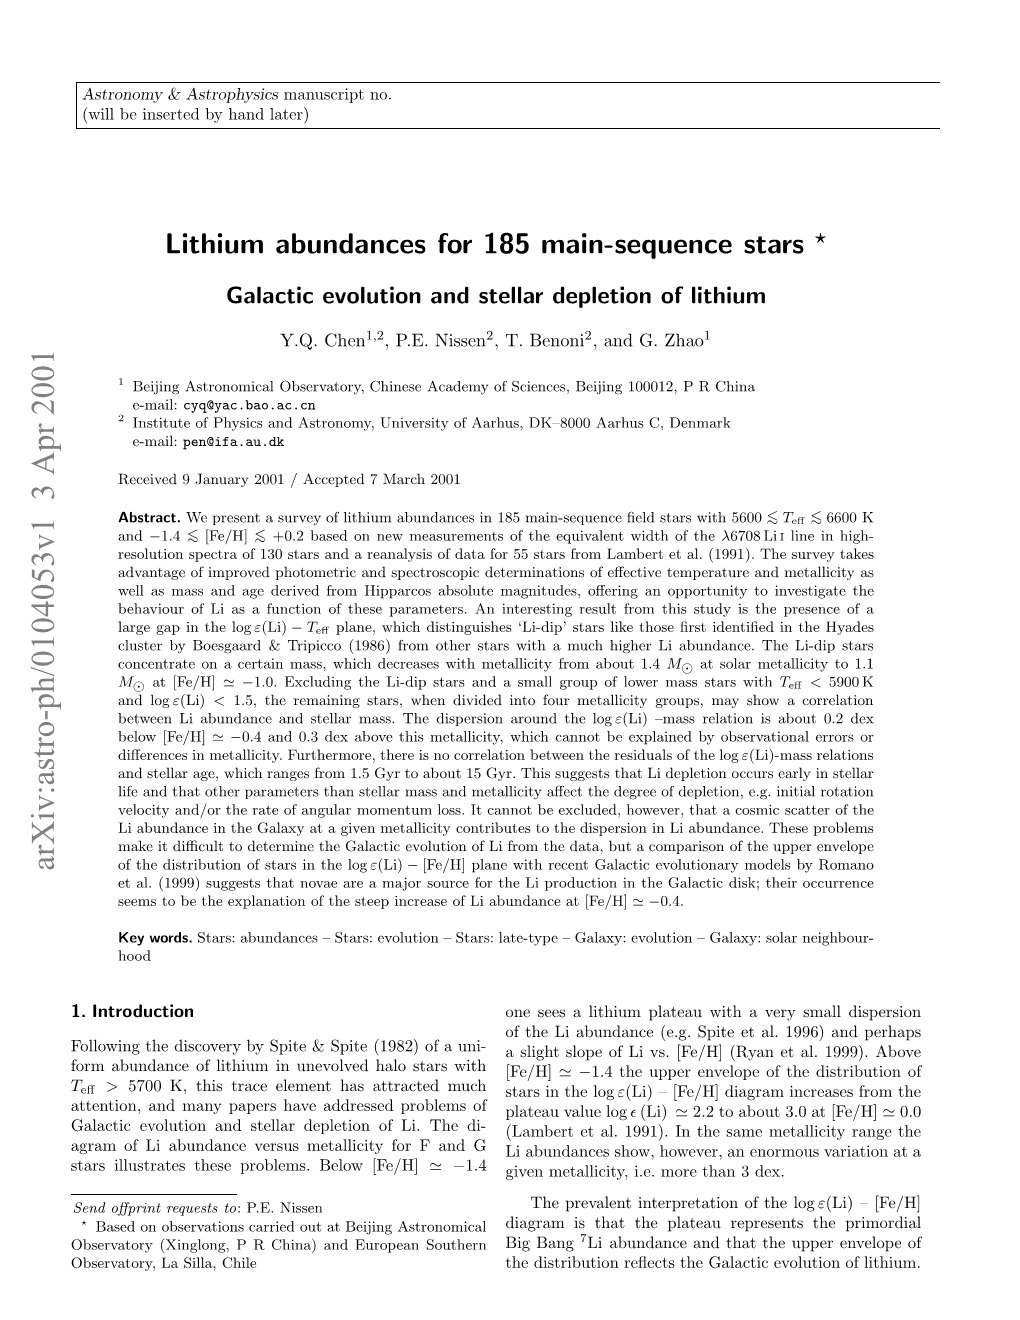 Lithium Abundances for 185 Main-Sequence Stars-Galactic Evolution and Stellar Depletion of Lithium